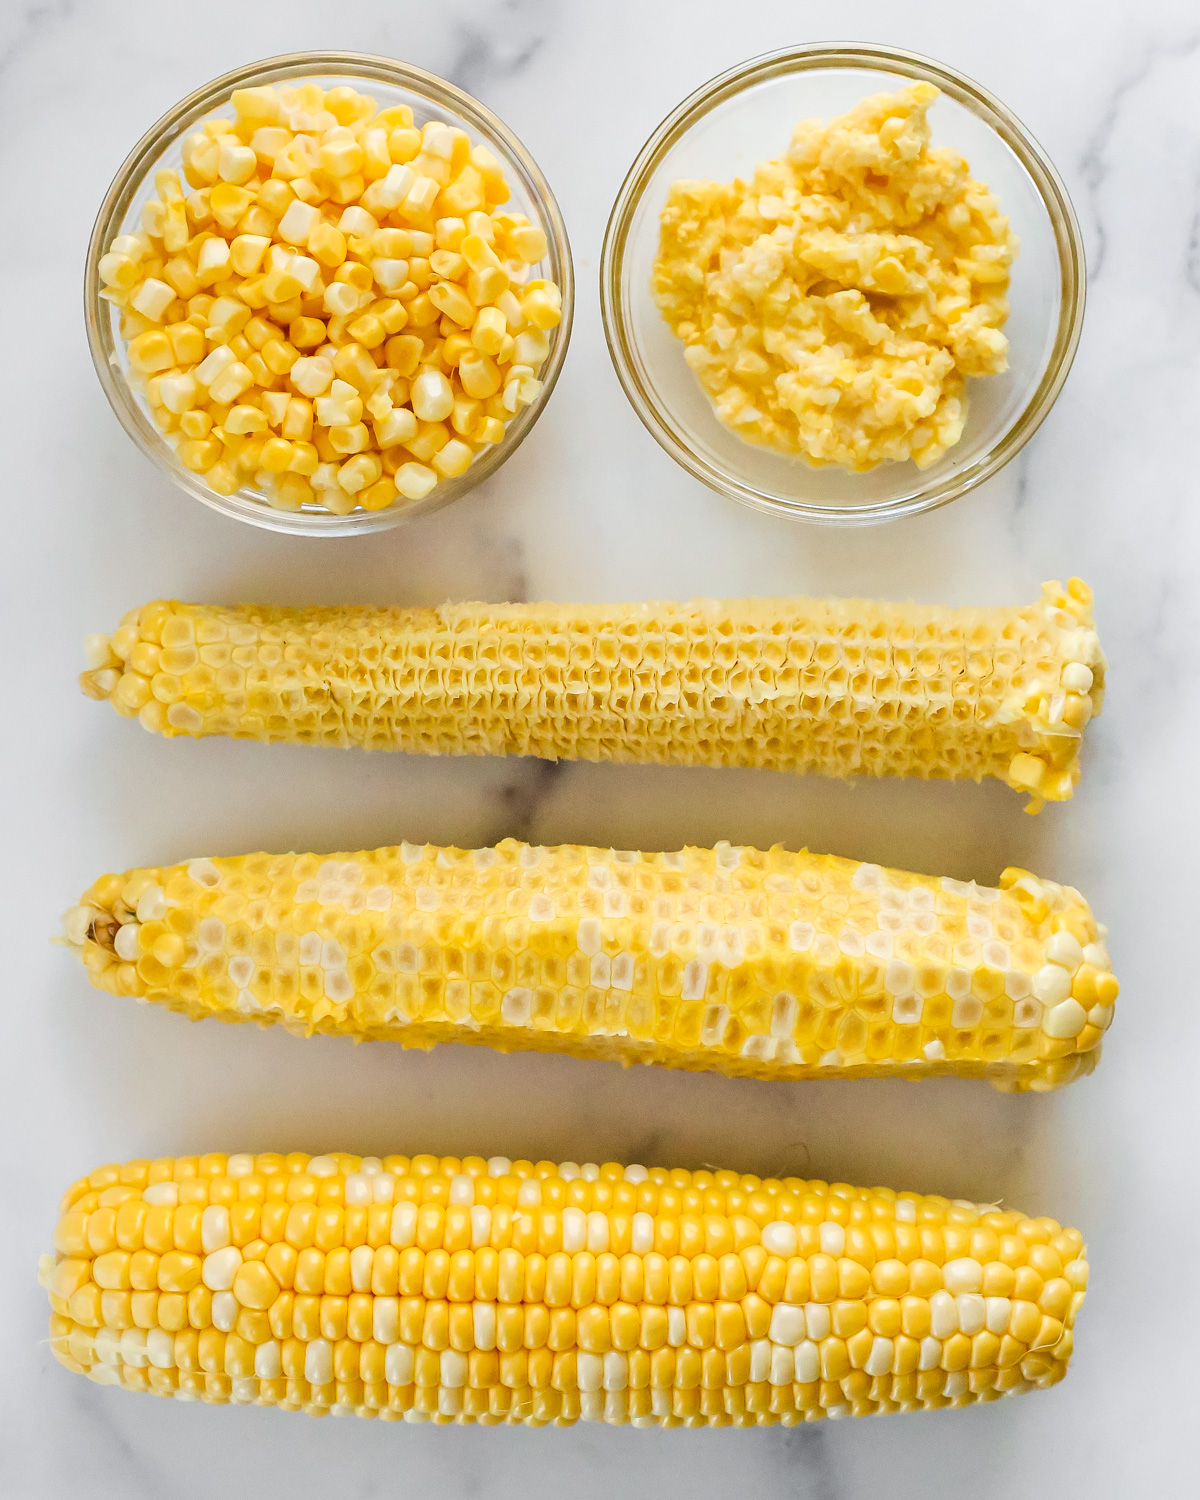 Overhead view of three corn cobs, showing the difference between a shucked ear of corn, a cob with the kernels sliced off, and a cob with the kernels milked. Two small glass ramekins show the corn kernels compared to the milked corn